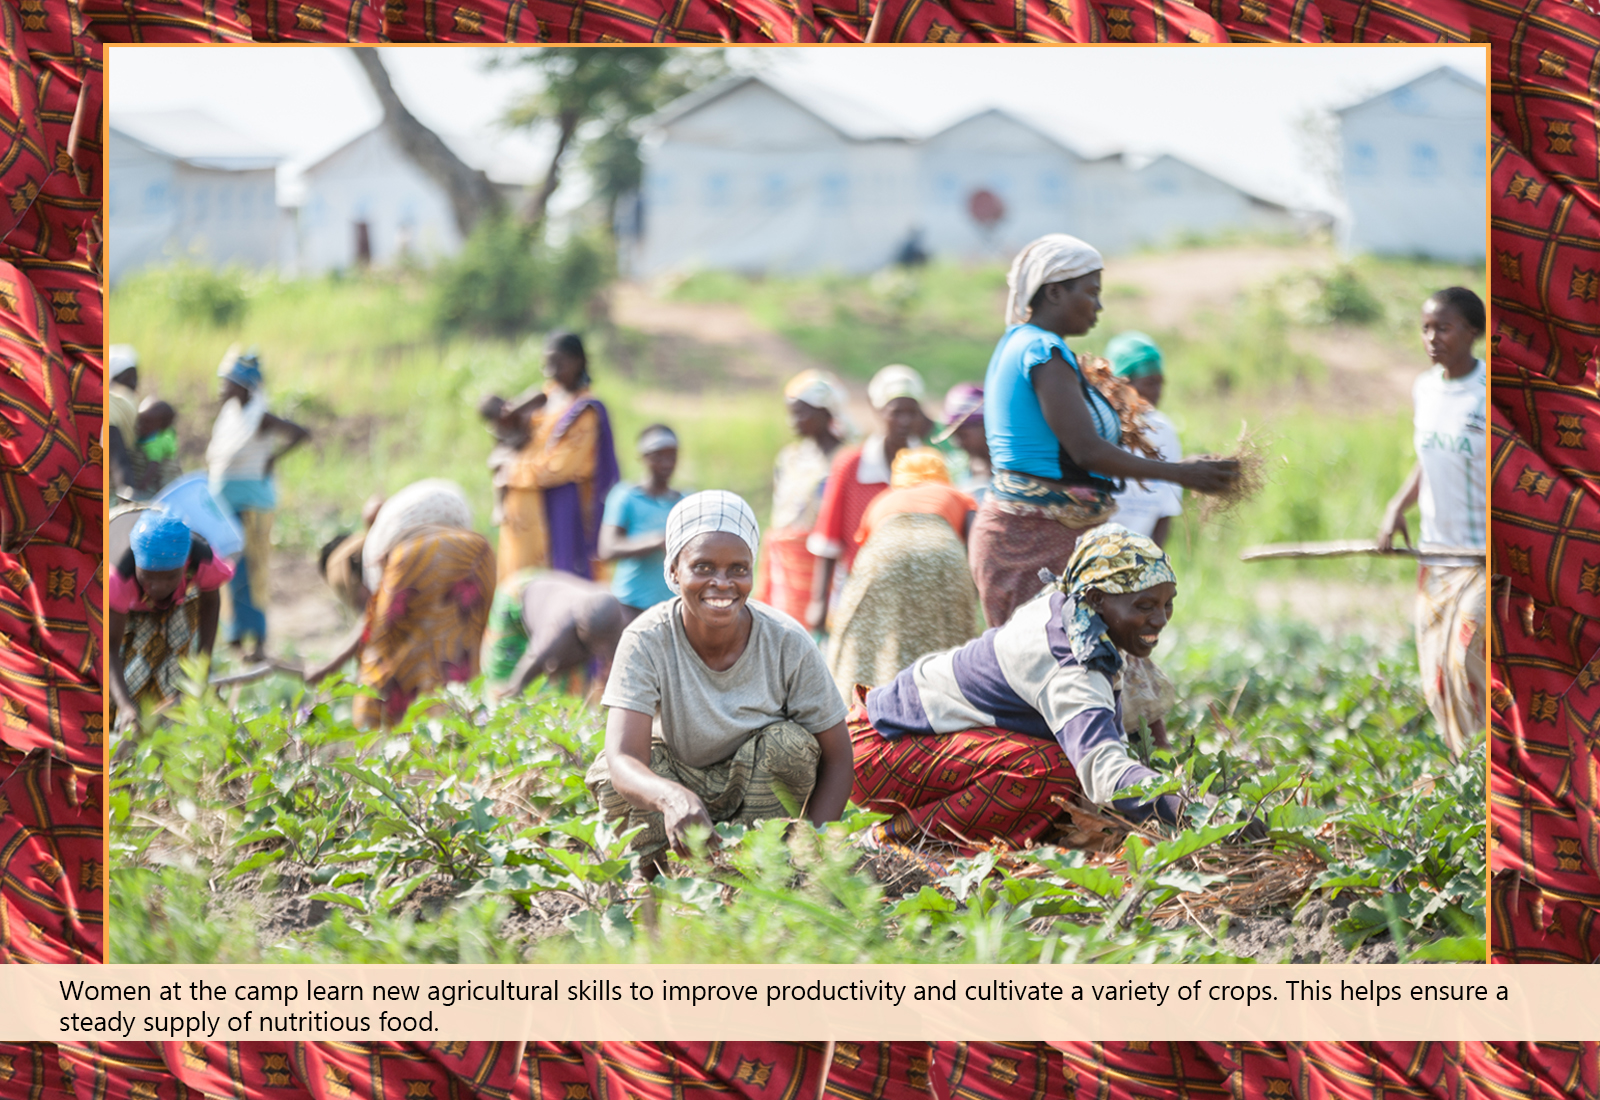 Women at the camp learn new agricultural skills to improve productivity and cultivate a variety of crops. 